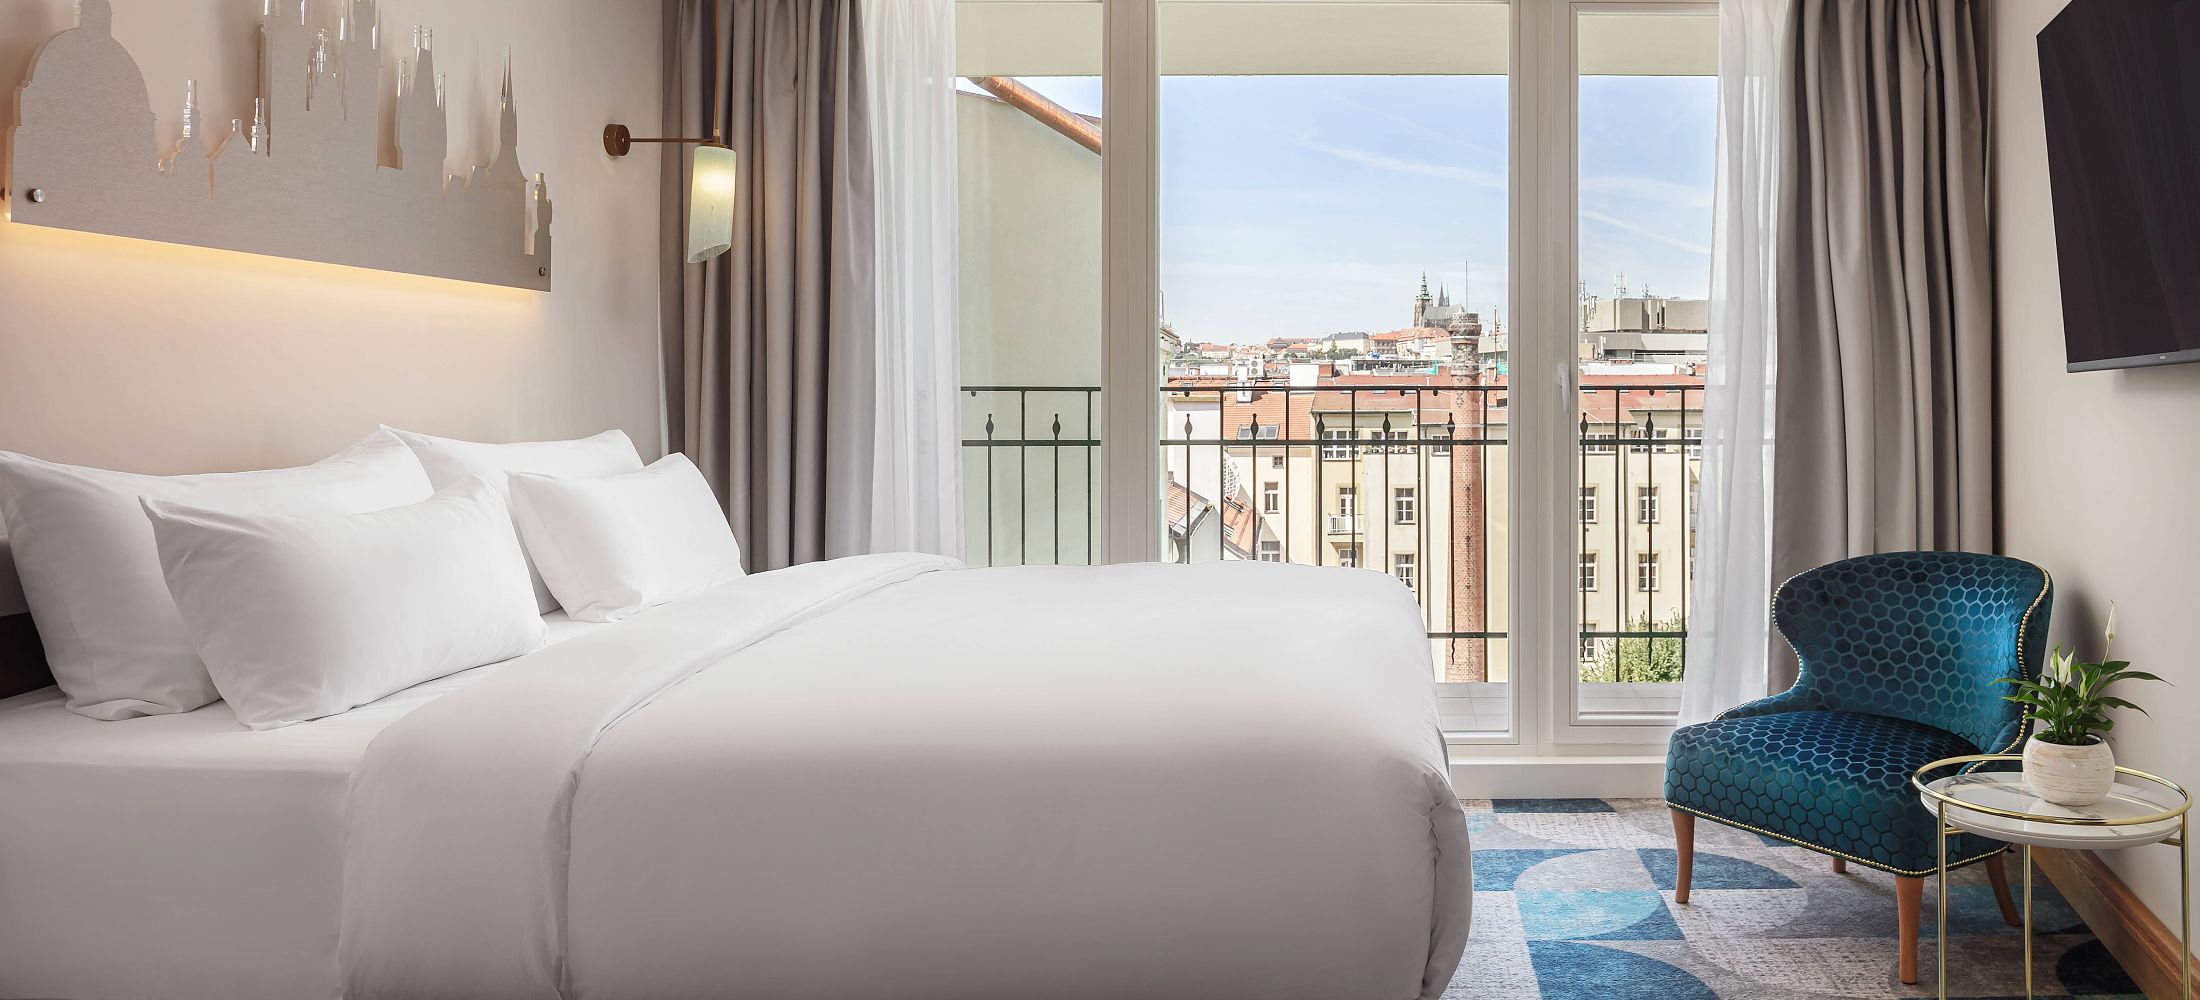 Double room with balcony | Allure Hotel & Residence Prague